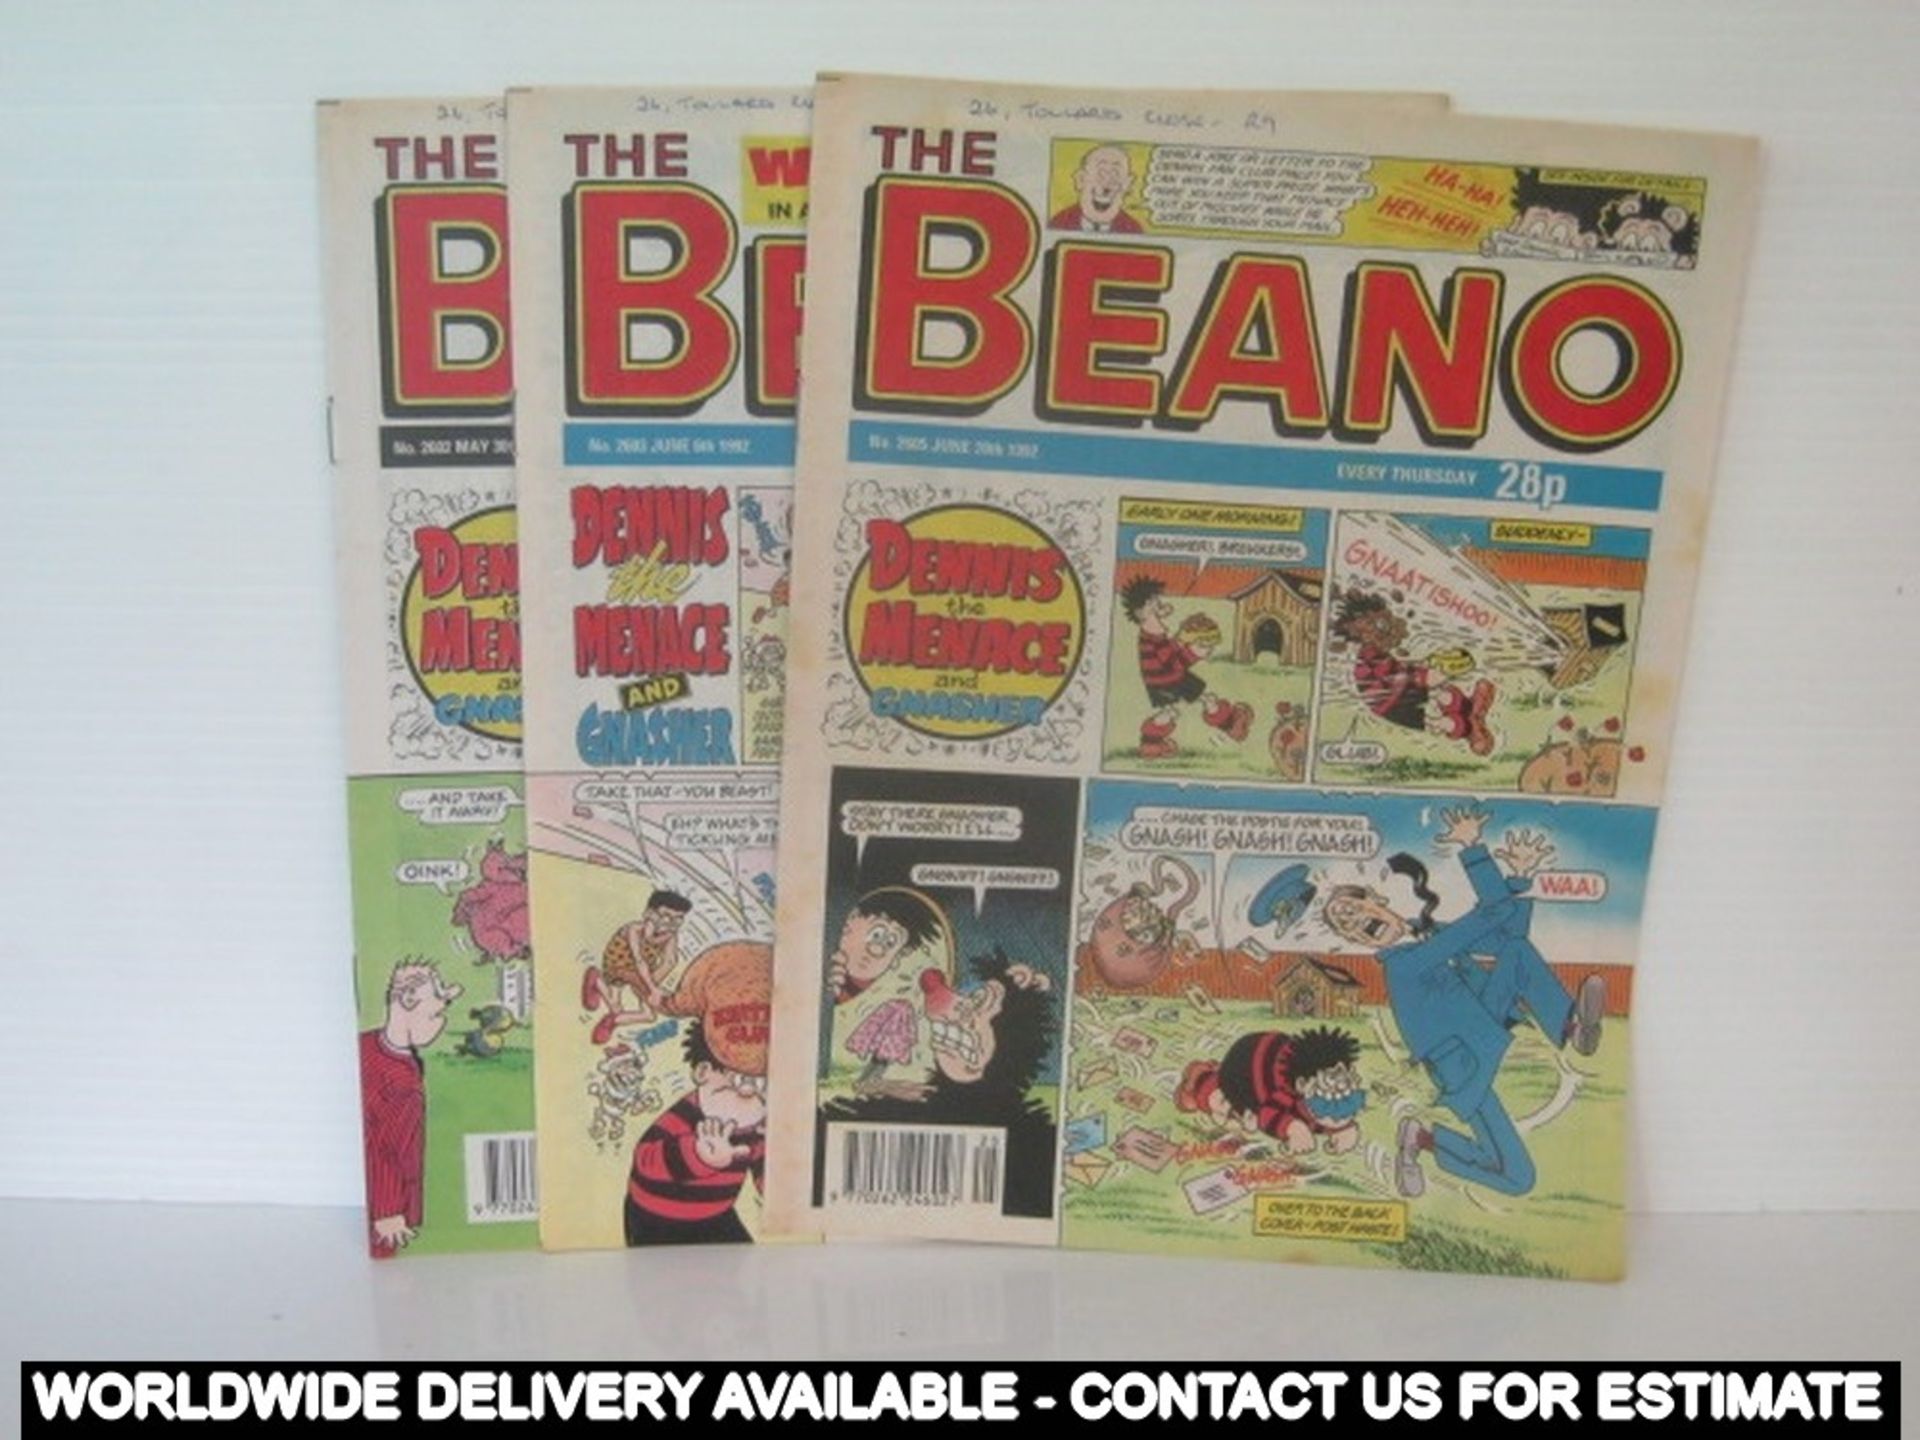 20 x Beano comics (approximately) - ranging from May 1992 to November 1992 - Image 2 of 2